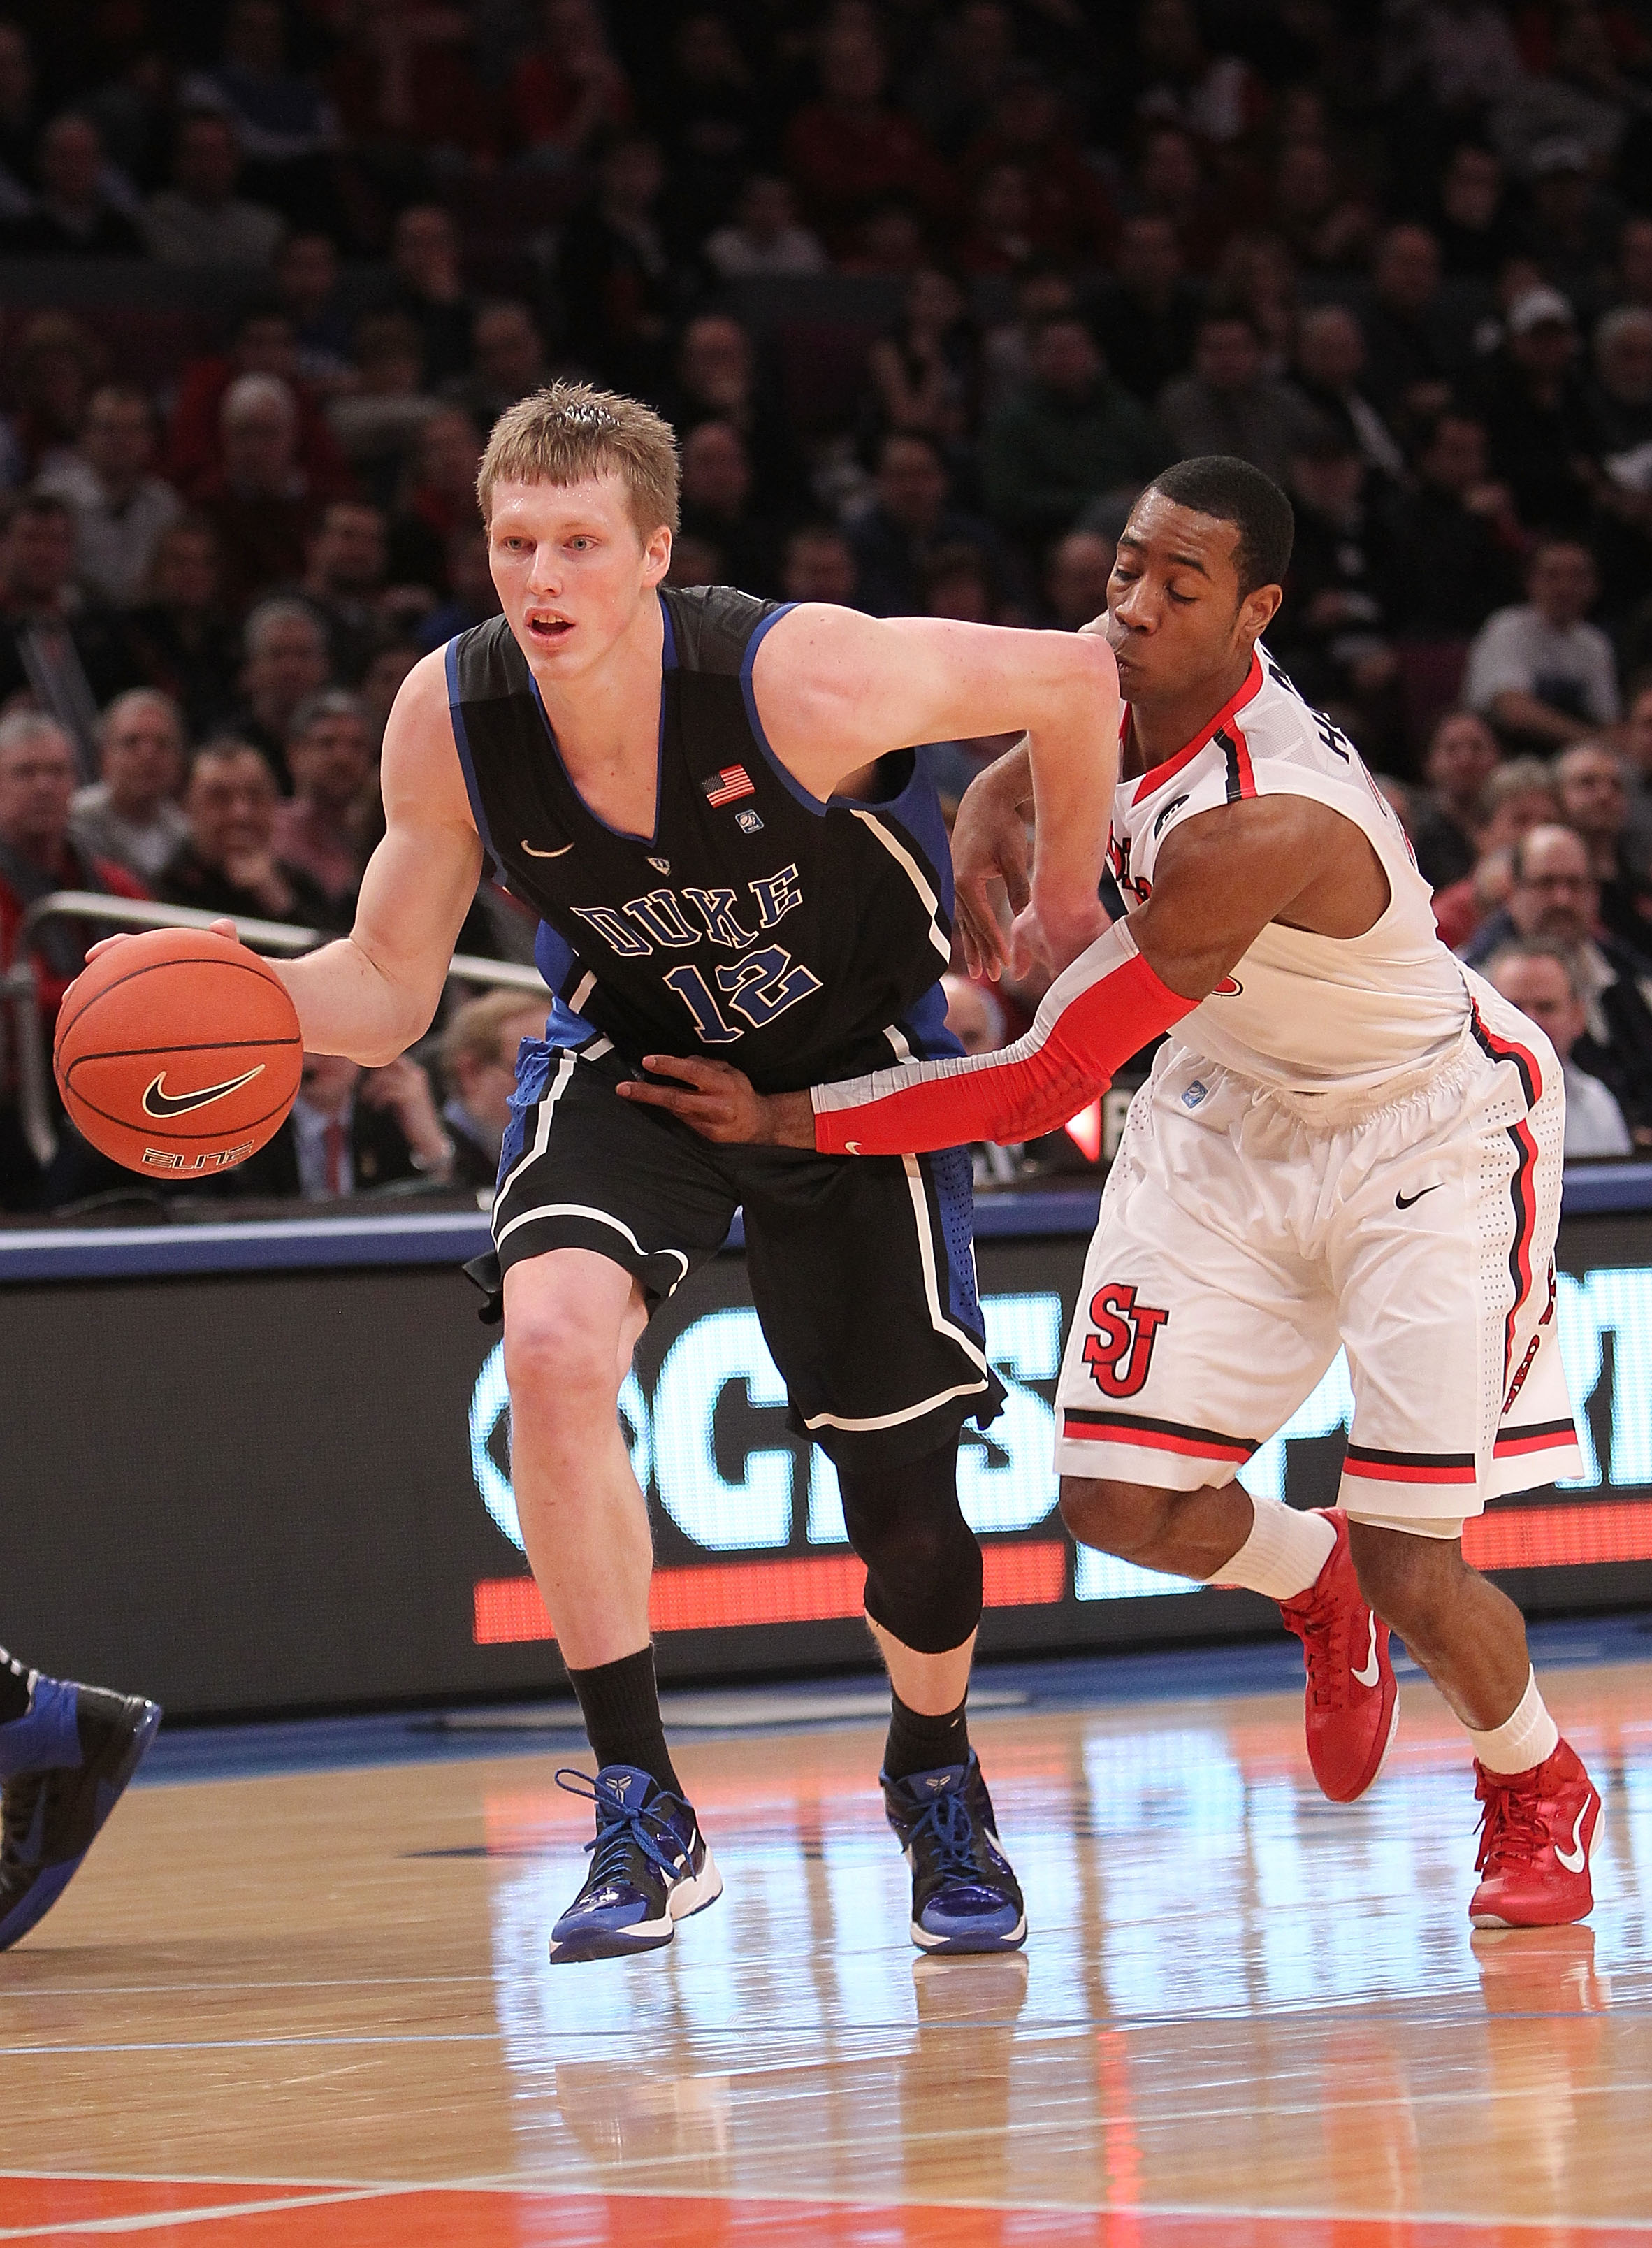 NEW YORK, NY - JANUARY 30:  Kyle Singler #12 of the Duke Blue Devils dribbles the ball past Paris Horne #23 of the St. John's Red Storm at Madison Square Garden on January 30, 2011 in New York City.  (Photo by Nick Laham/Getty Images)